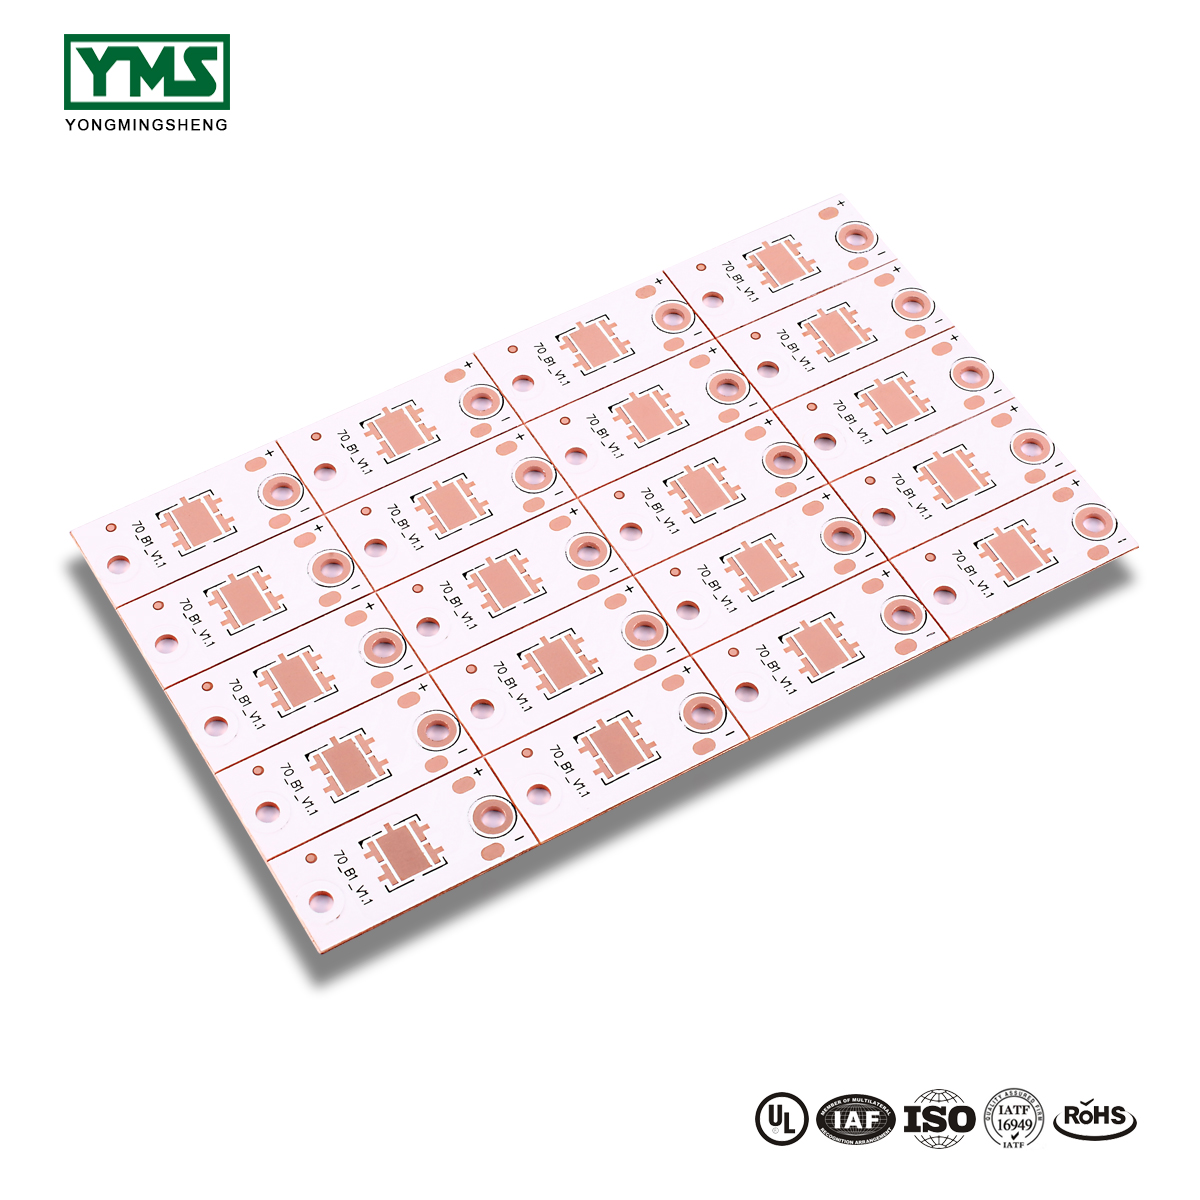 Competitive Price for Thermoelectric Separation Car Copper Base Pcb - 1Layer Thermoelectric Copper base Board | YMSPCB – Yongmingsheng